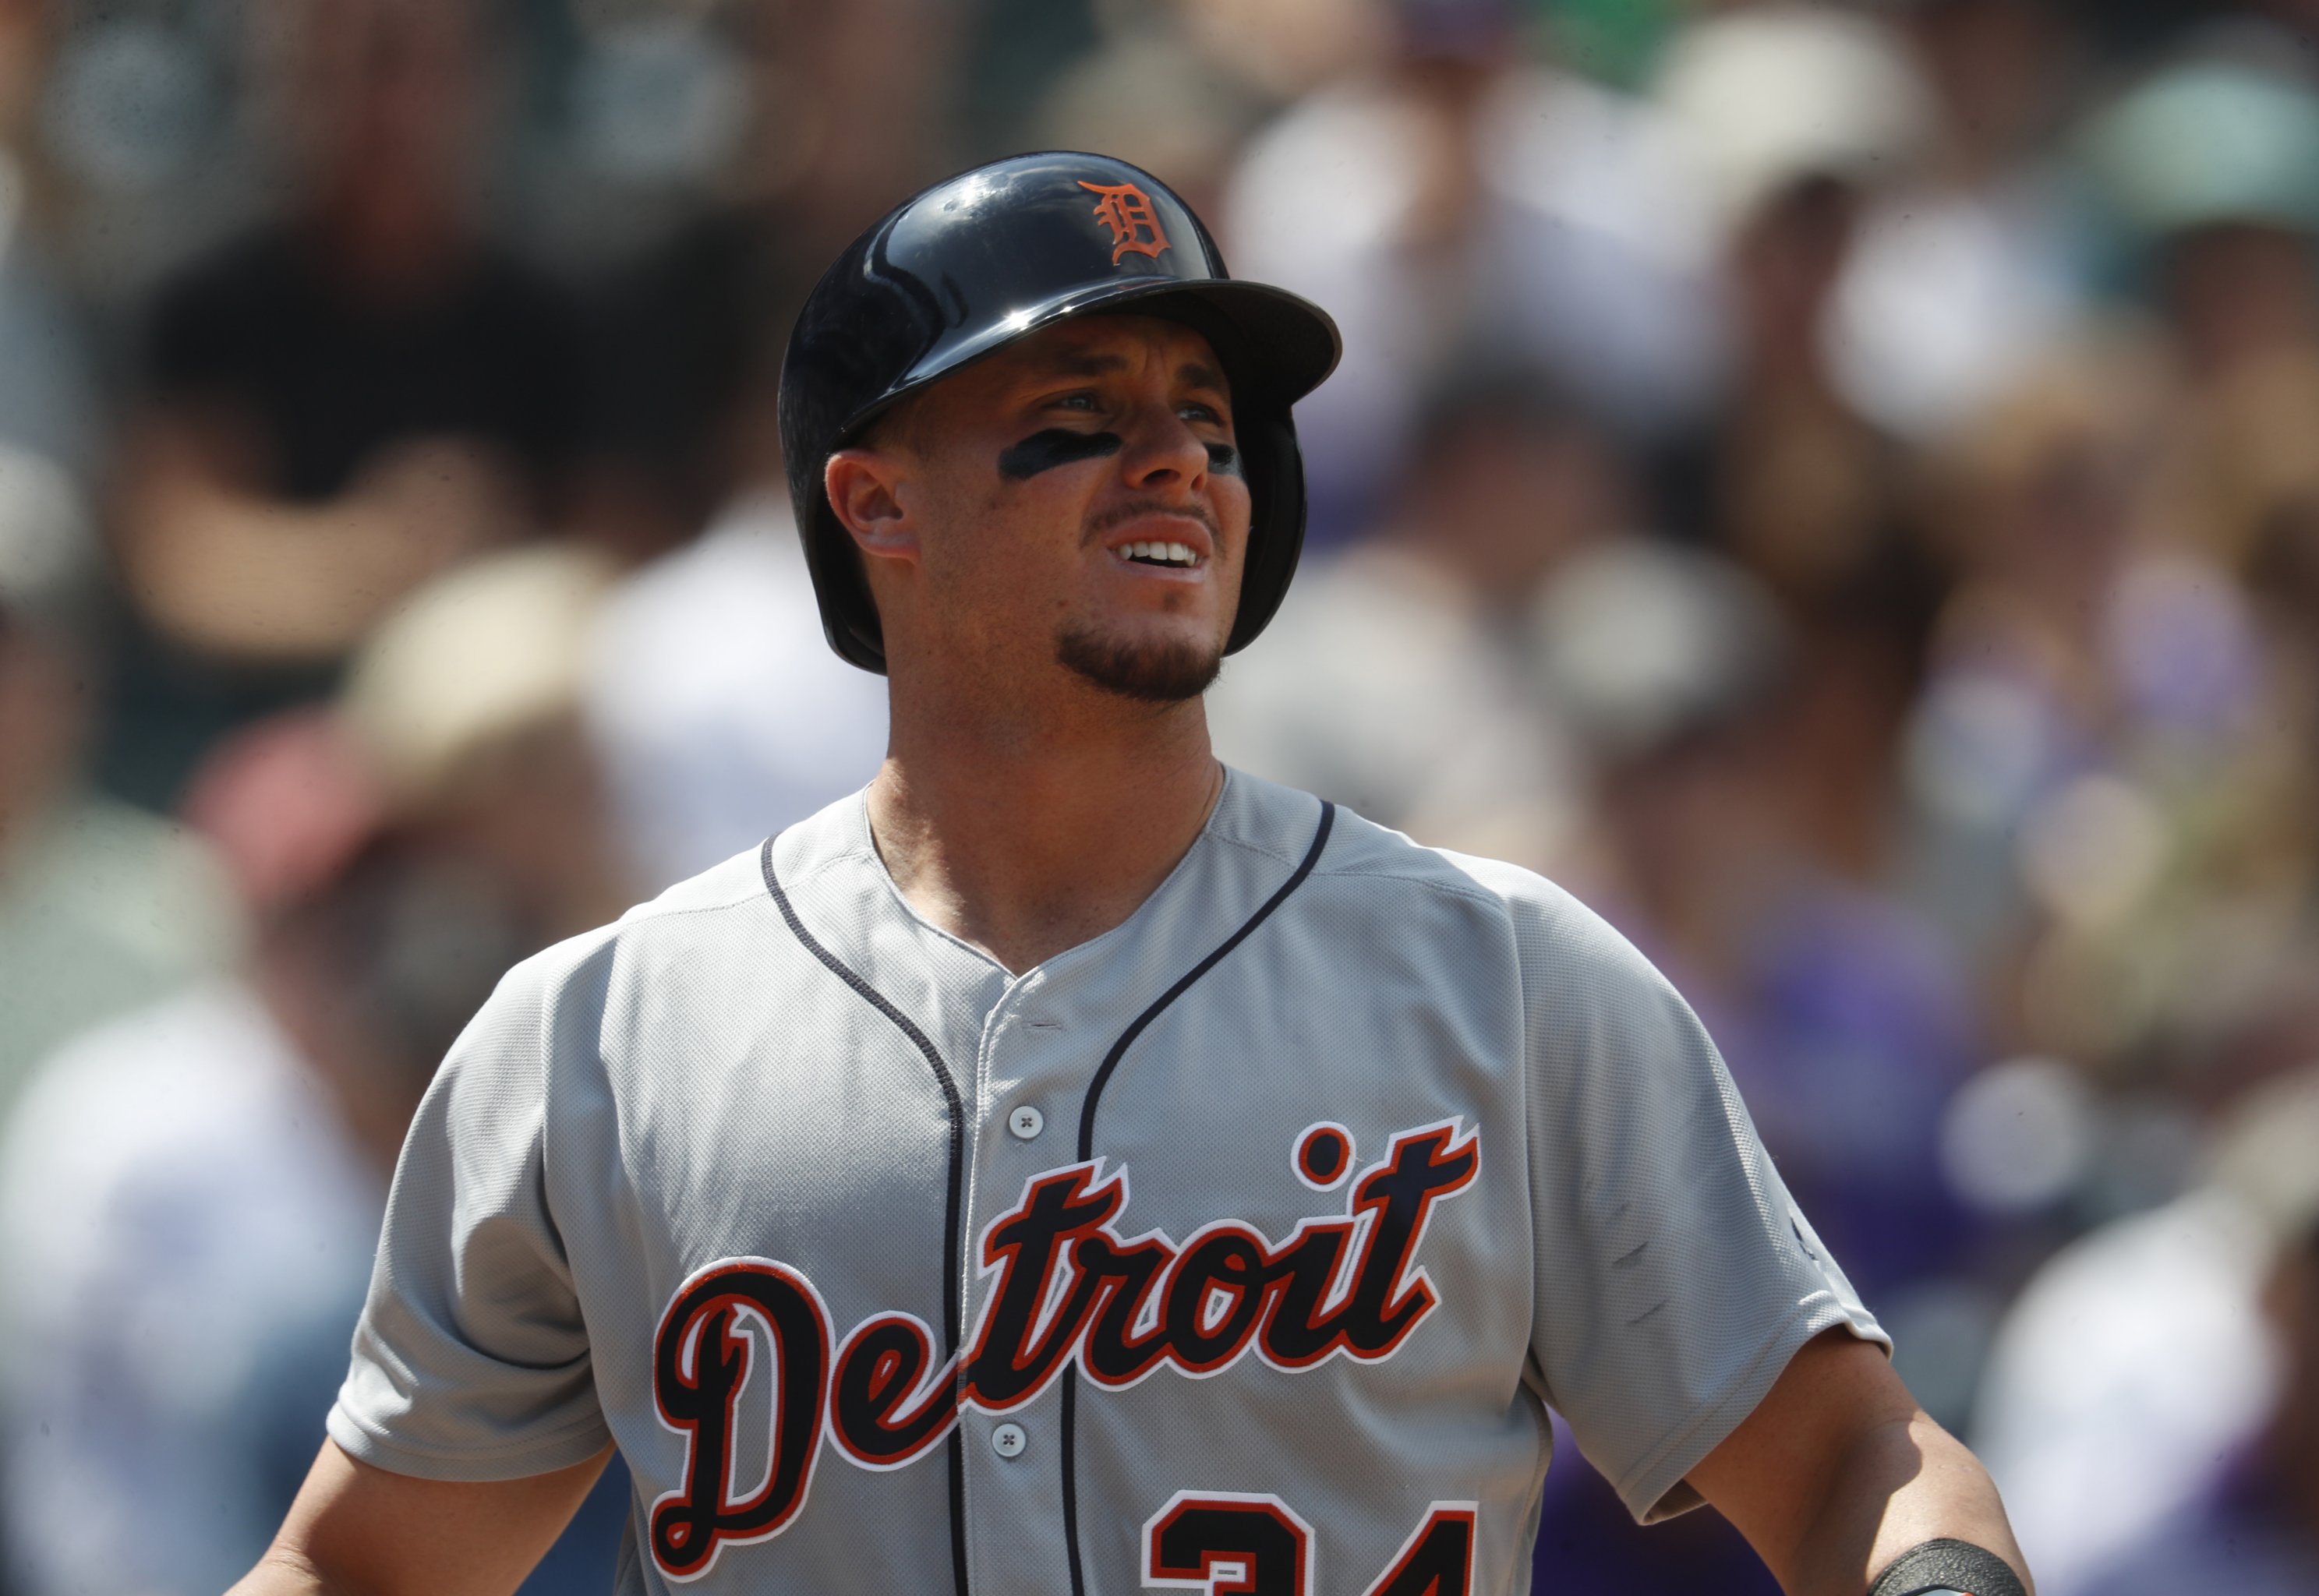 Austin Meadows has chance to play big role in Tigers' turnaround 